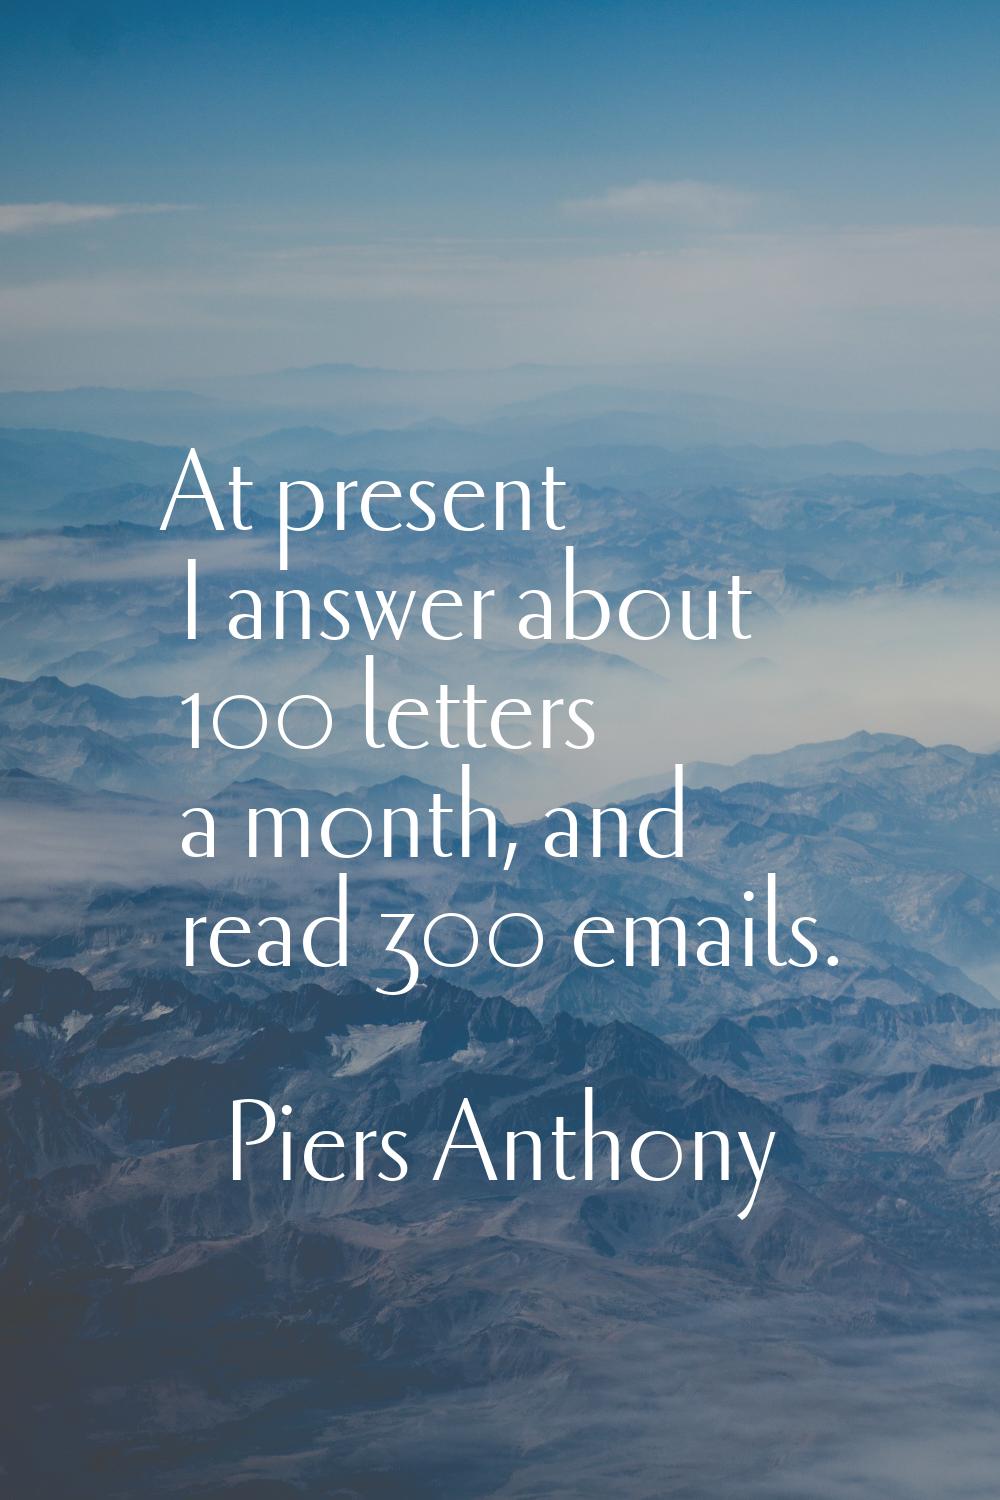 At present I answer about 100 letters a month, and read 300 emails.